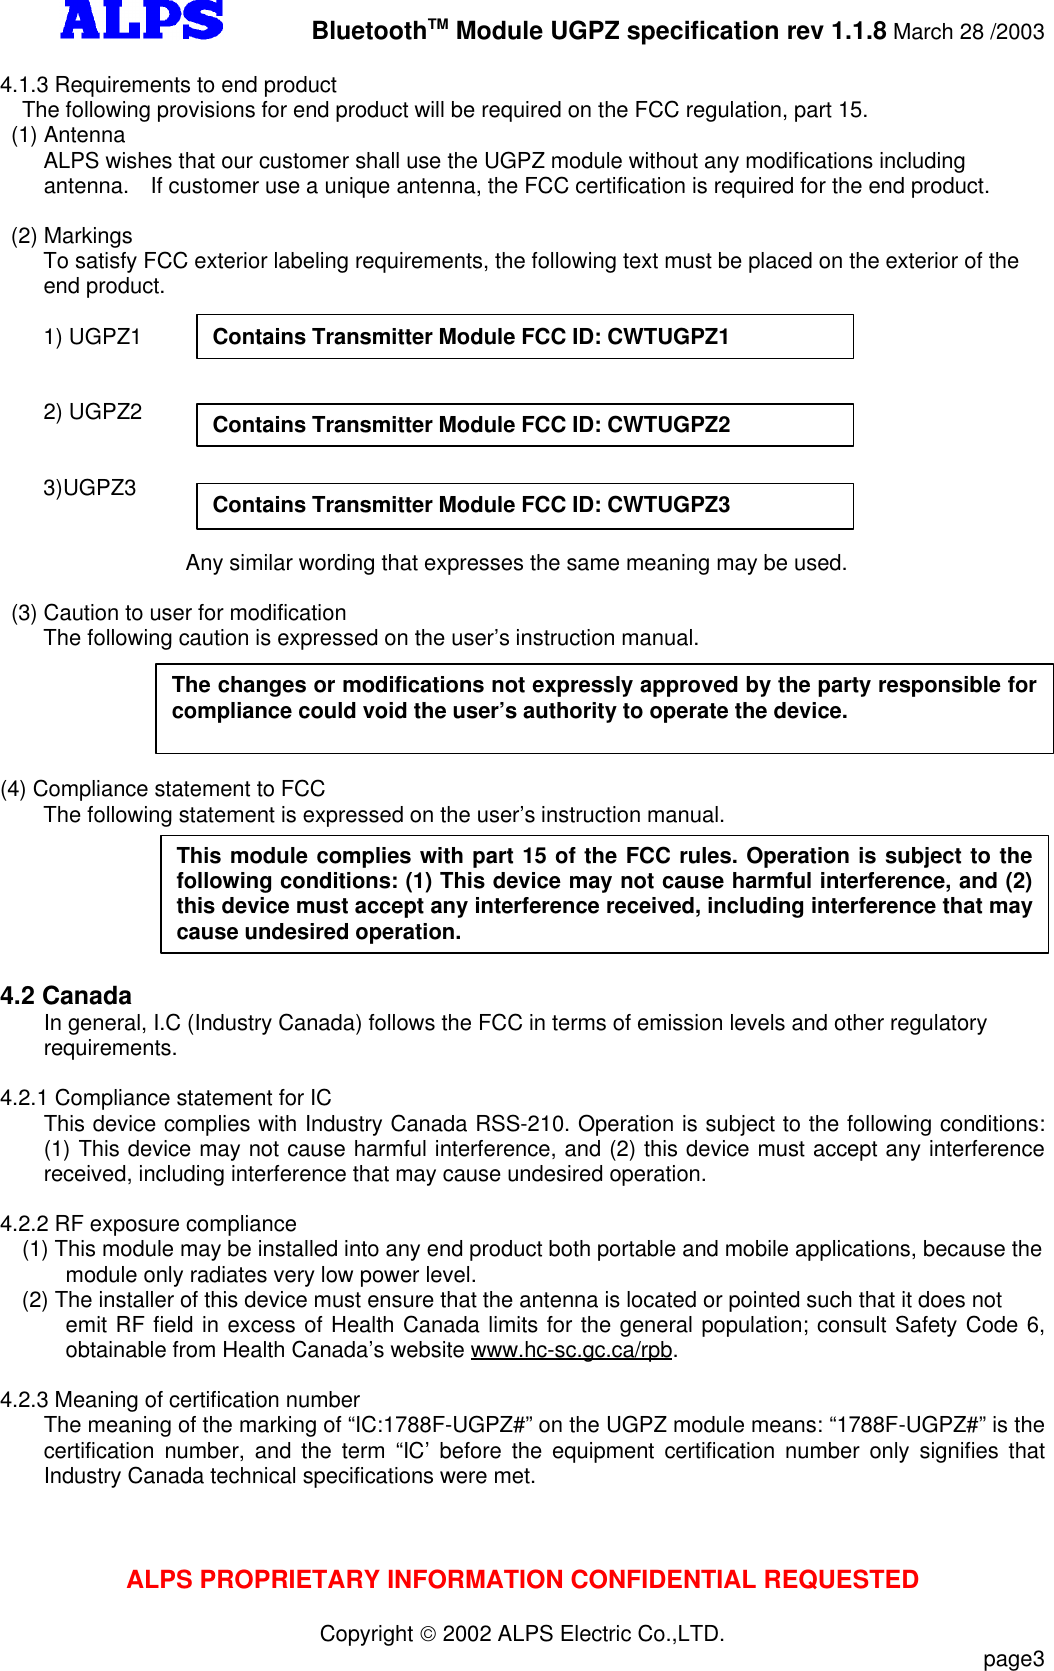         BluetoothTM Module UGPZ specification rev 1.1.8 March 28 /2003ALPS PROPRIETARY INFORMATION CONFIDENTIAL REQUESTEDCopyright  2002 ALPS Electric Co.,LTD.                           page34.1.3 Requirements to end productThe following provisions for end product will be required on the FCC regulation, part 15. (1) Antenna    ALPS wishes that our customer shall use the UGPZ module without any modifications includingantenna.  If customer use a unique antenna, the FCC certification is required for the end product. (2) Markings    To satisfy FCC exterior labeling requirements, the following text must be placed on the exterior of the    end product.                   1) UGPZ1    2) UGPZ2    3)UGPZ3                 Any similar wording that expresses the same meaning may be used. (3) Caution to user for modification    The following caution is expressed on the user’s instruction manual.(4) Compliance statement to FCC    The following statement is expressed on the user’s instruction manual.4.2 CanadaIn general, I.C (Industry Canada) follows the FCC in terms of emission levels and other regulatoryrequirements.4.2.1 Compliance statement for ICThis device complies with Industry Canada RSS-210. Operation is subject to the following conditions:(1) This device may not cause harmful interference, and (2) this device must accept any interferencereceived, including interference that may cause undesired operation.4.2.2 RF exposure compliance(1) This module may be installed into any end product both portable and mobile applications, because themodule only radiates very low power level.(2) The installer of this device must ensure that the antenna is located or pointed such that it does notemit RF field in excess of Health Canada limits for the general population; consult Safety Code 6,obtainable from Health Canada’s website www.hc-sc.gc.ca/rpb.4.2.3 Meaning of certification numberThe meaning of the marking of “IC:1788F-UGPZ#” on the UGPZ module means: “1788F-UGPZ#” is thecertification number, and the term “IC’ before the equipment certification number only signifies thatIndustry Canada technical specifications were met.Contains Transmitter Module FCC ID: CWTUGPZ1Contains Transmitter Module FCC ID: CWTUGPZ2Contains Transmitter Module FCC ID: CWTUGPZ3The changes or modifications not expressly approved by the party responsible forcompliance could void the user’s authority to operate the device.This module complies with part 15 of the FCC rules. Operation is subject to thefollowing conditions: (1) This device may not cause harmful interference, and (2)this device must accept any interference received, including interference that maycause undesired operation.